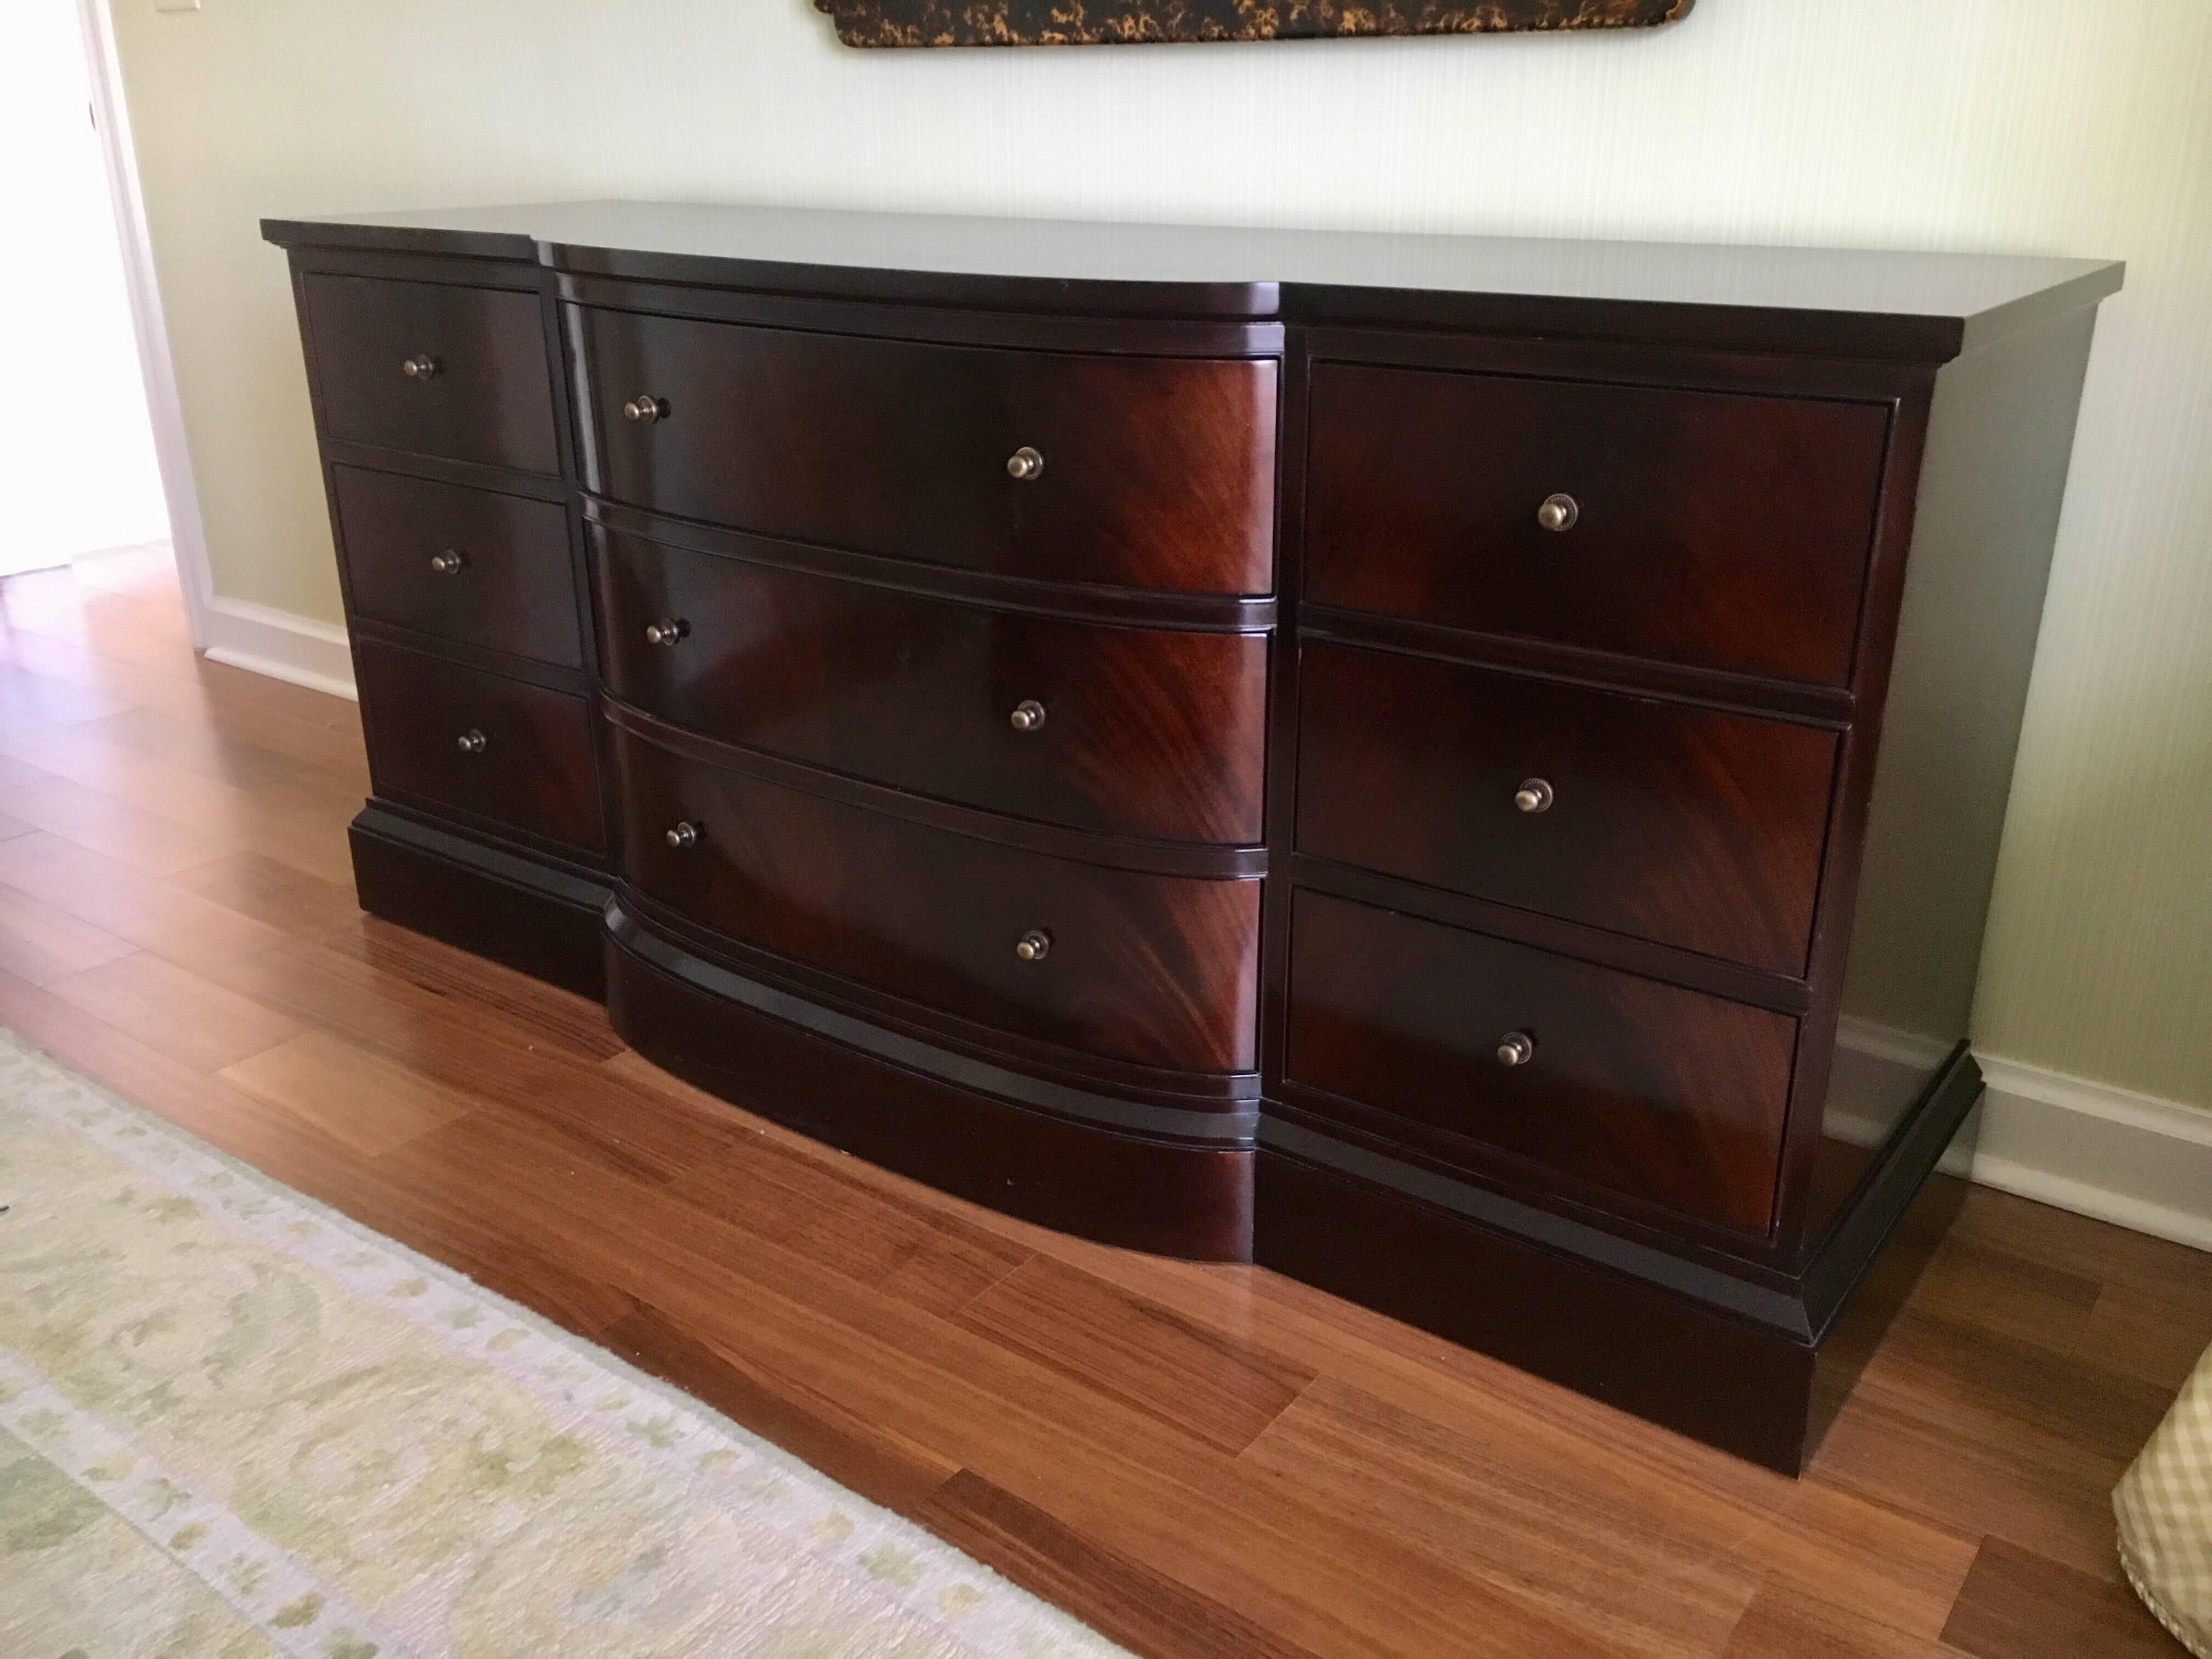 Coveted Baker Furniture Thomas Pheasant triple dresser that retails for $13,450.00 today.
Mahogany solids and veneers with sable finish make this piece the standard in luxurious living!
 